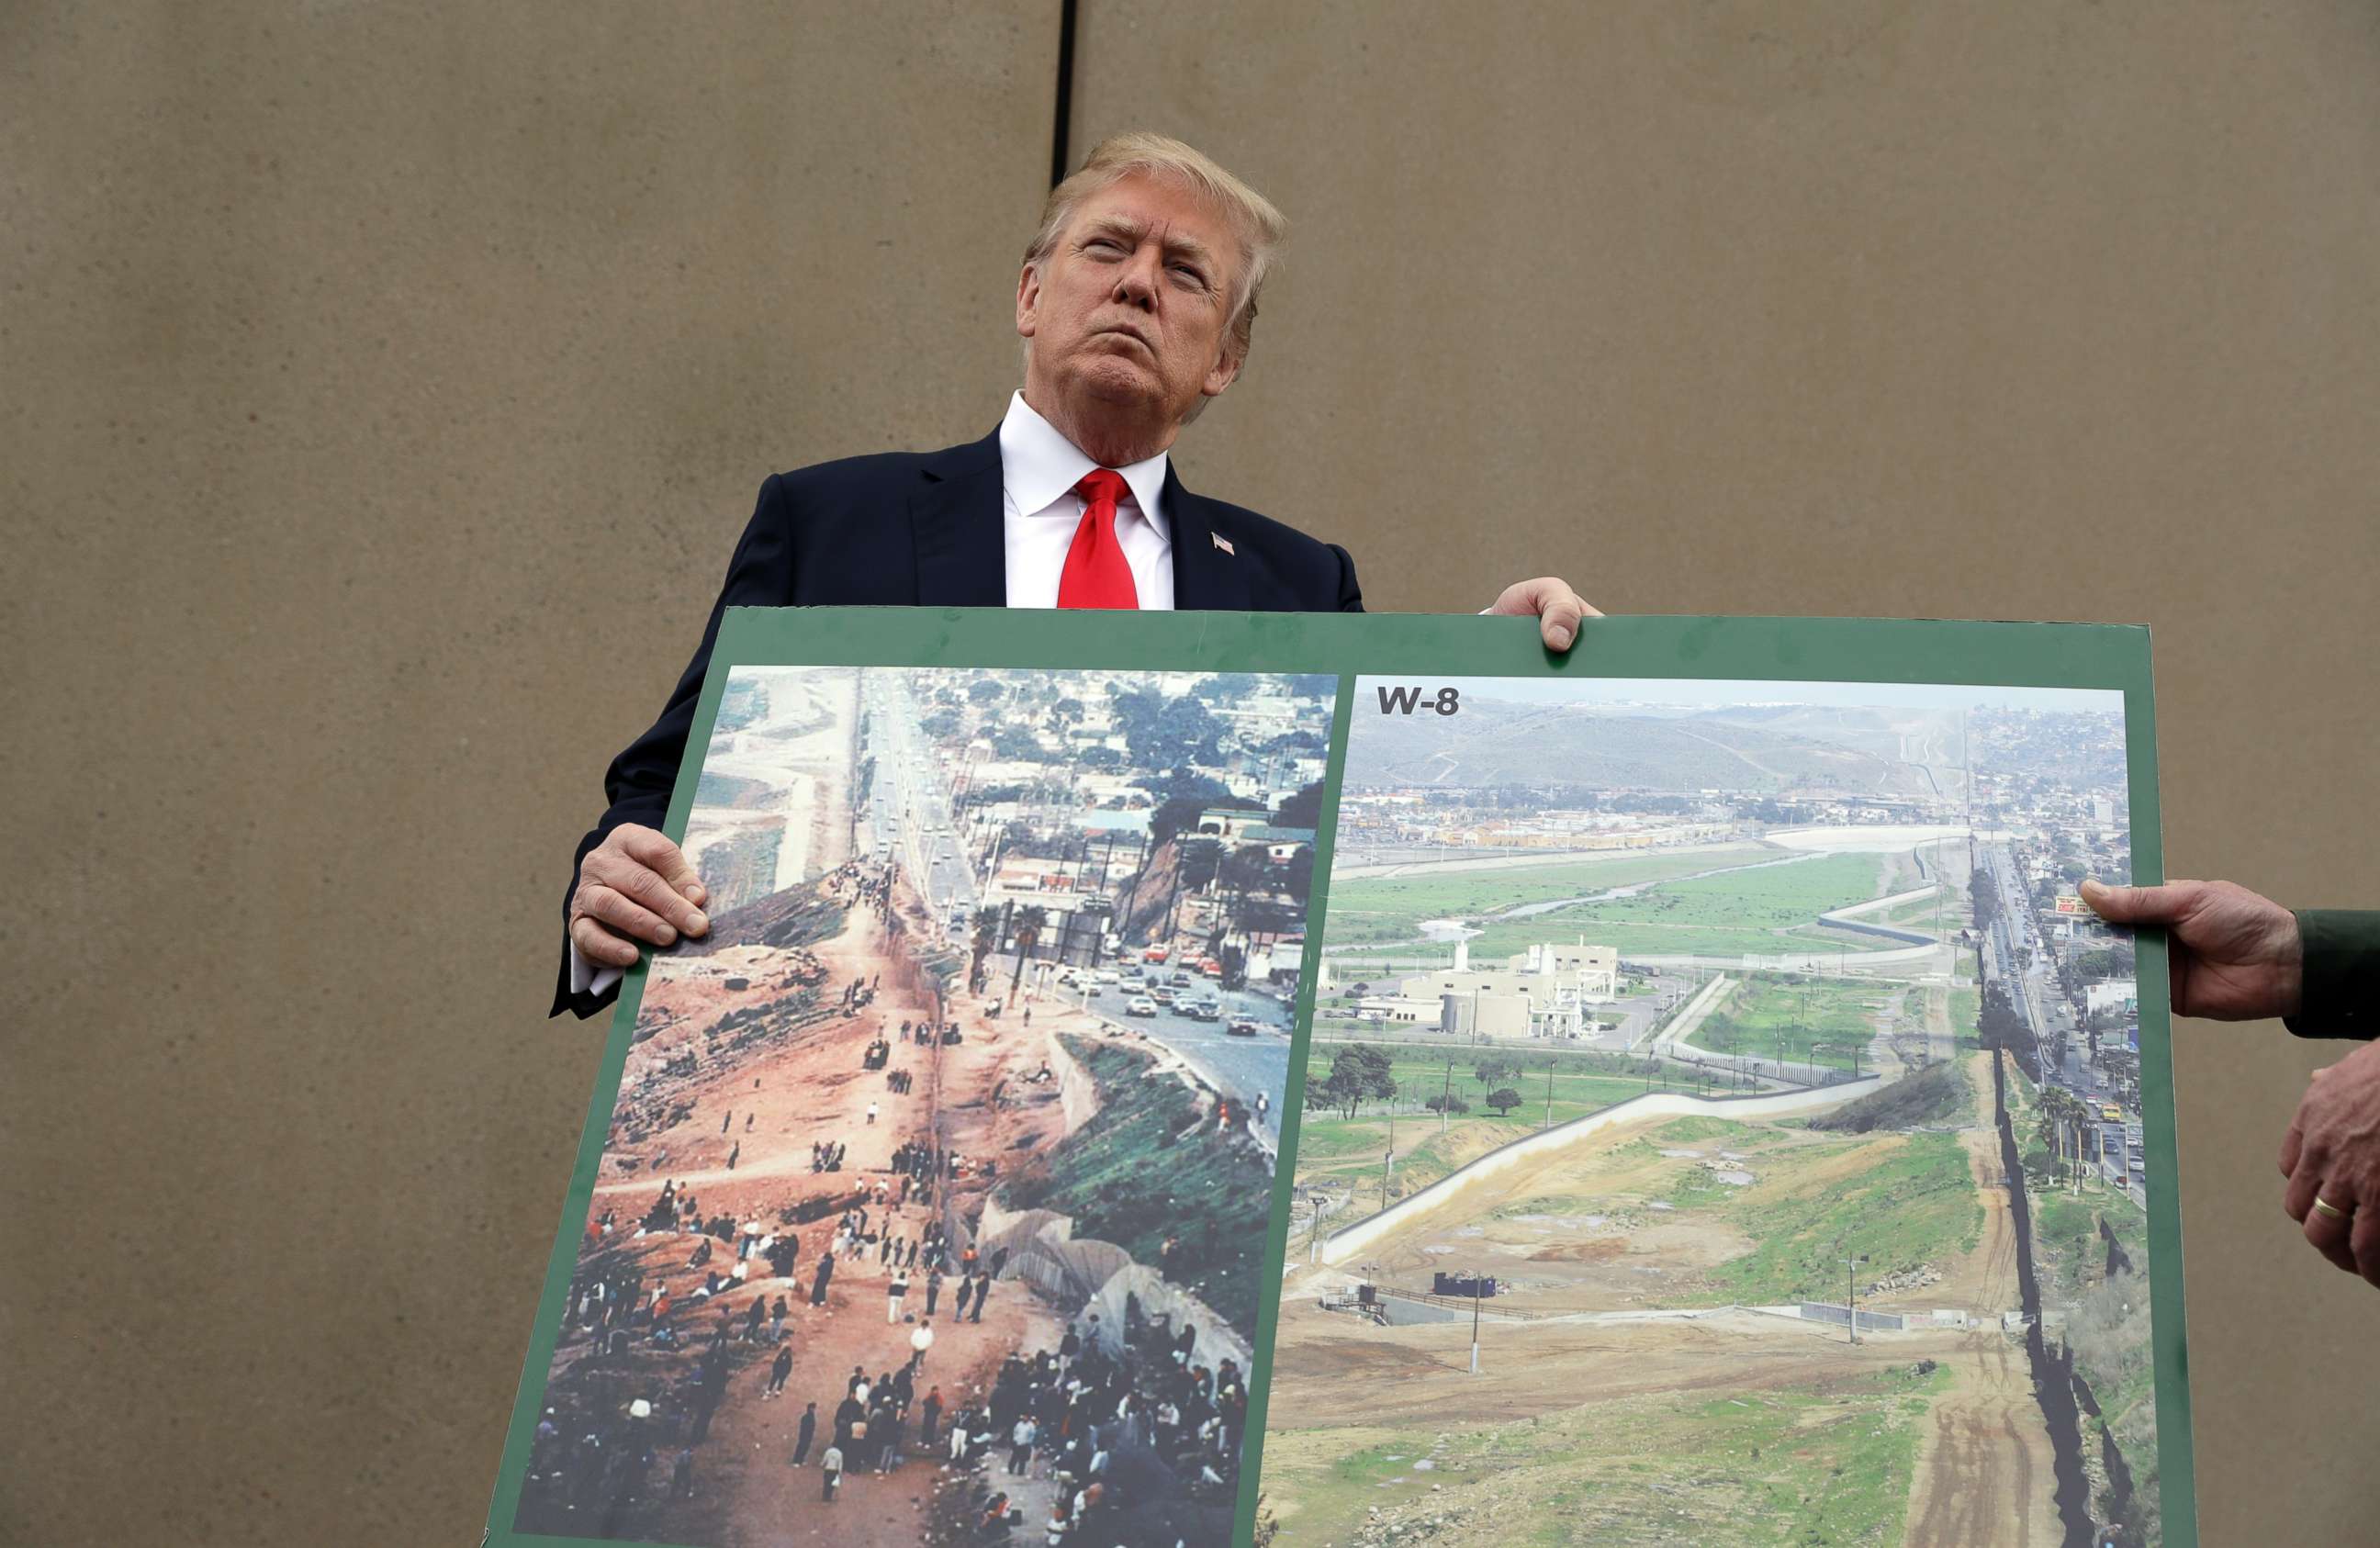 PHOTO: President Donald Trump holds an image of the border area as he speaks during a tour to review border wall prototypes, March 13, 2018, in San Diego.